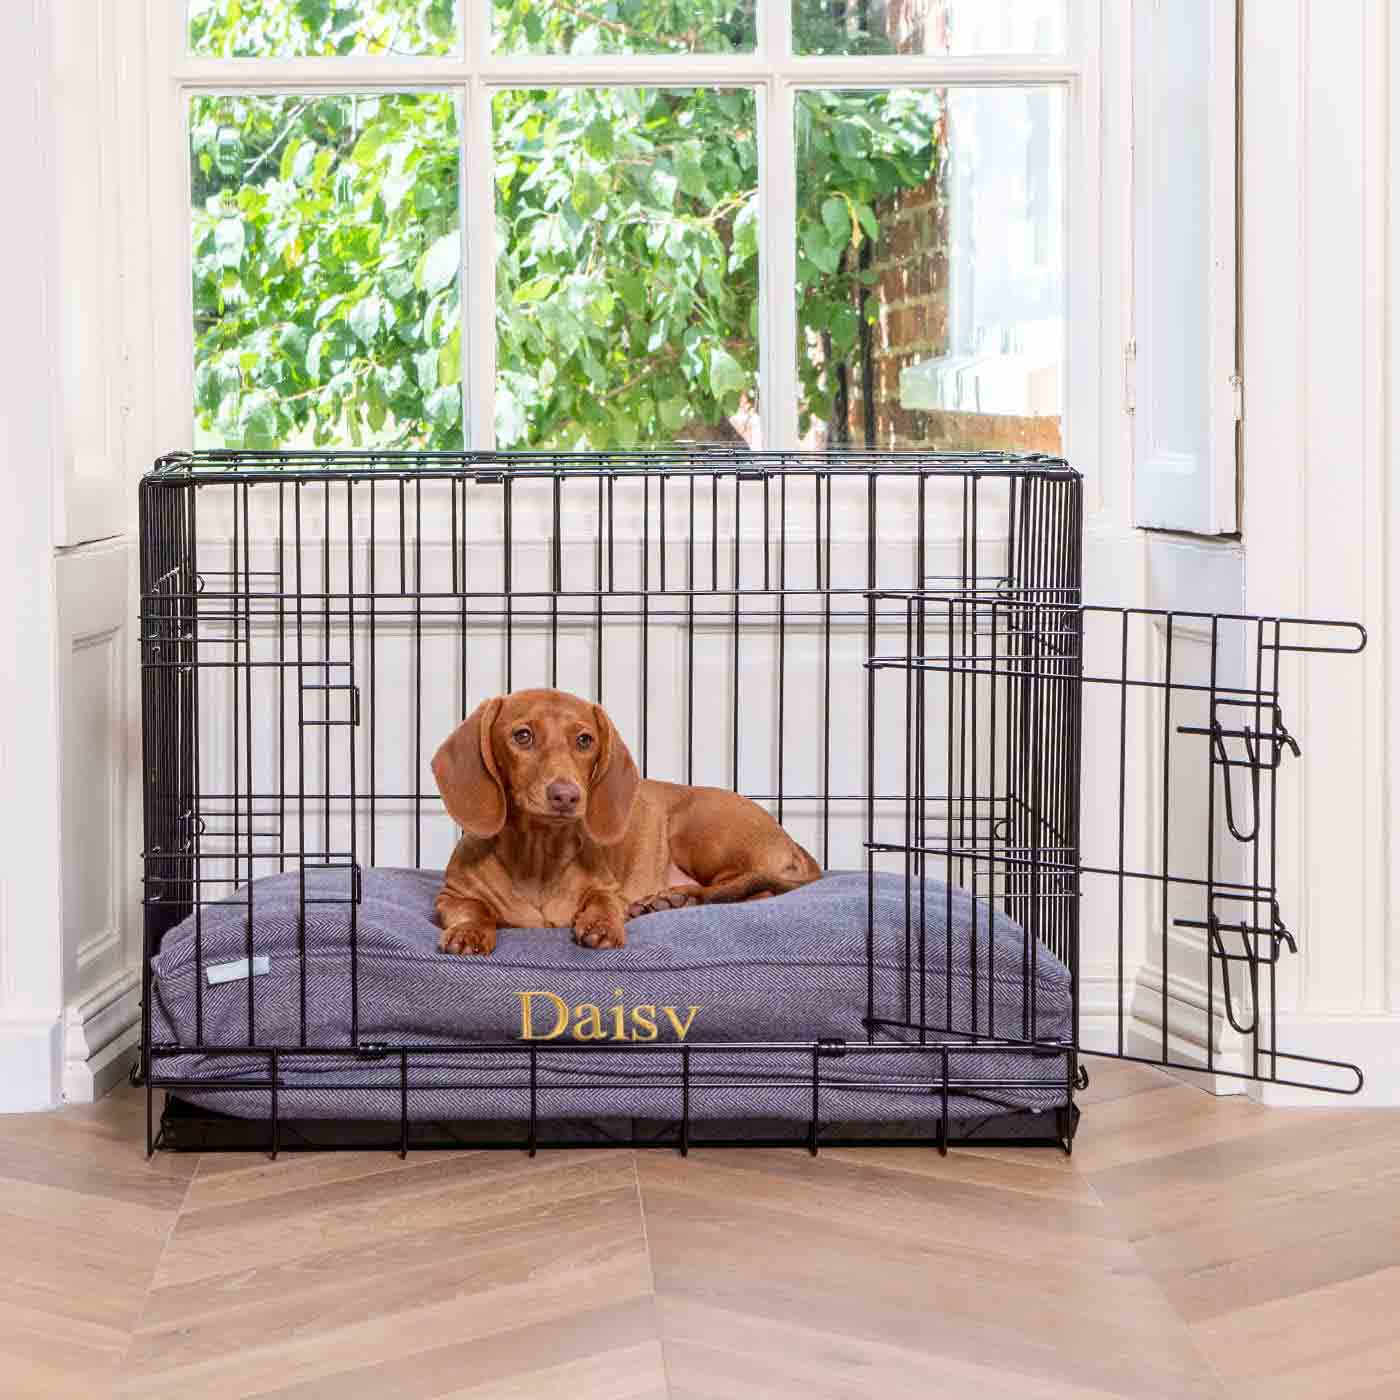 Luxury Dog Crate Cushion, Oxford Herringbone Tweed Crate Cushion The Perfect Dog Crate Accessory, Available To Personalise Now at Lords & Labradors